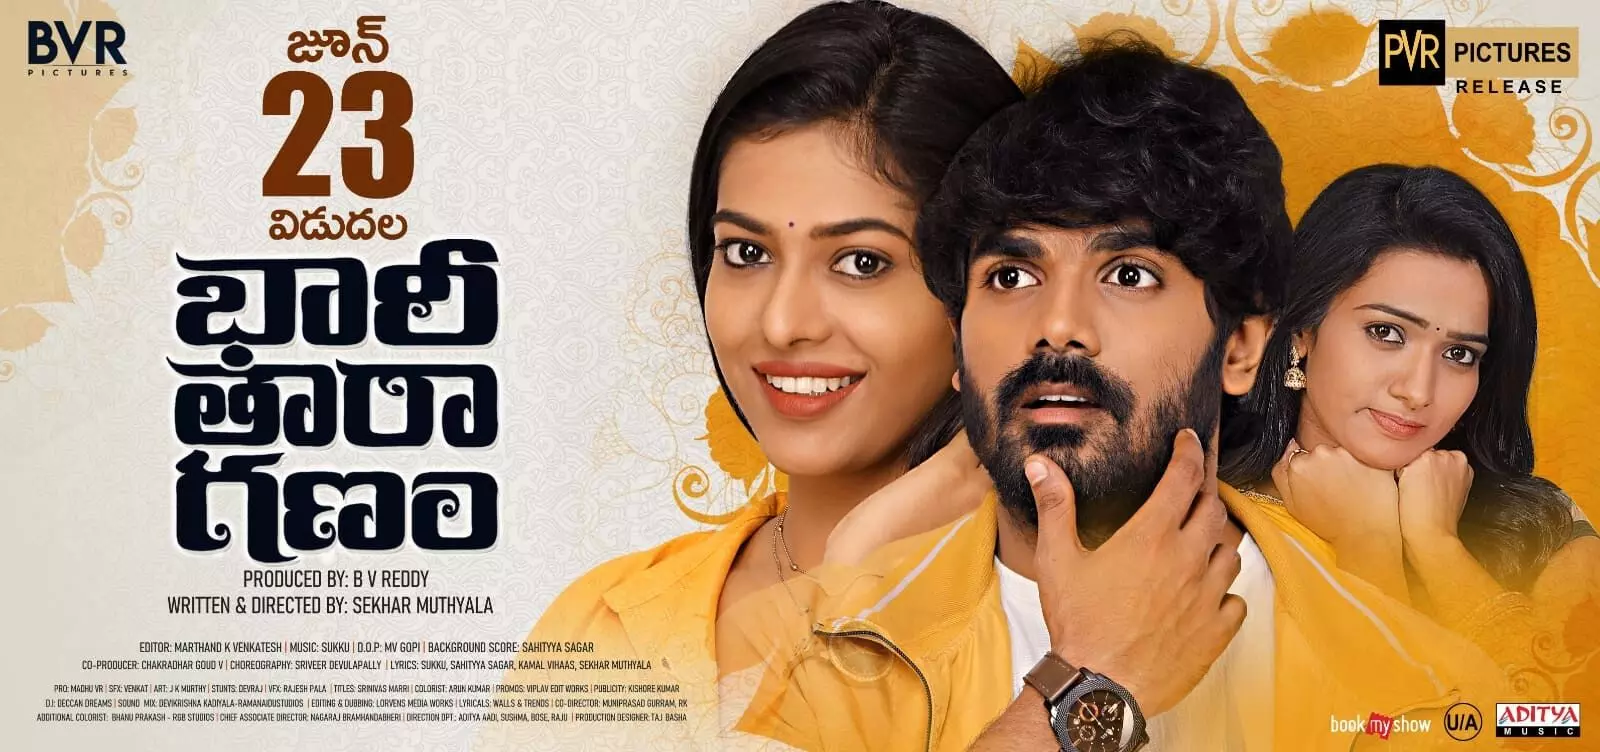 Bhari Taraganam Movie review: Entertains with love and comedy